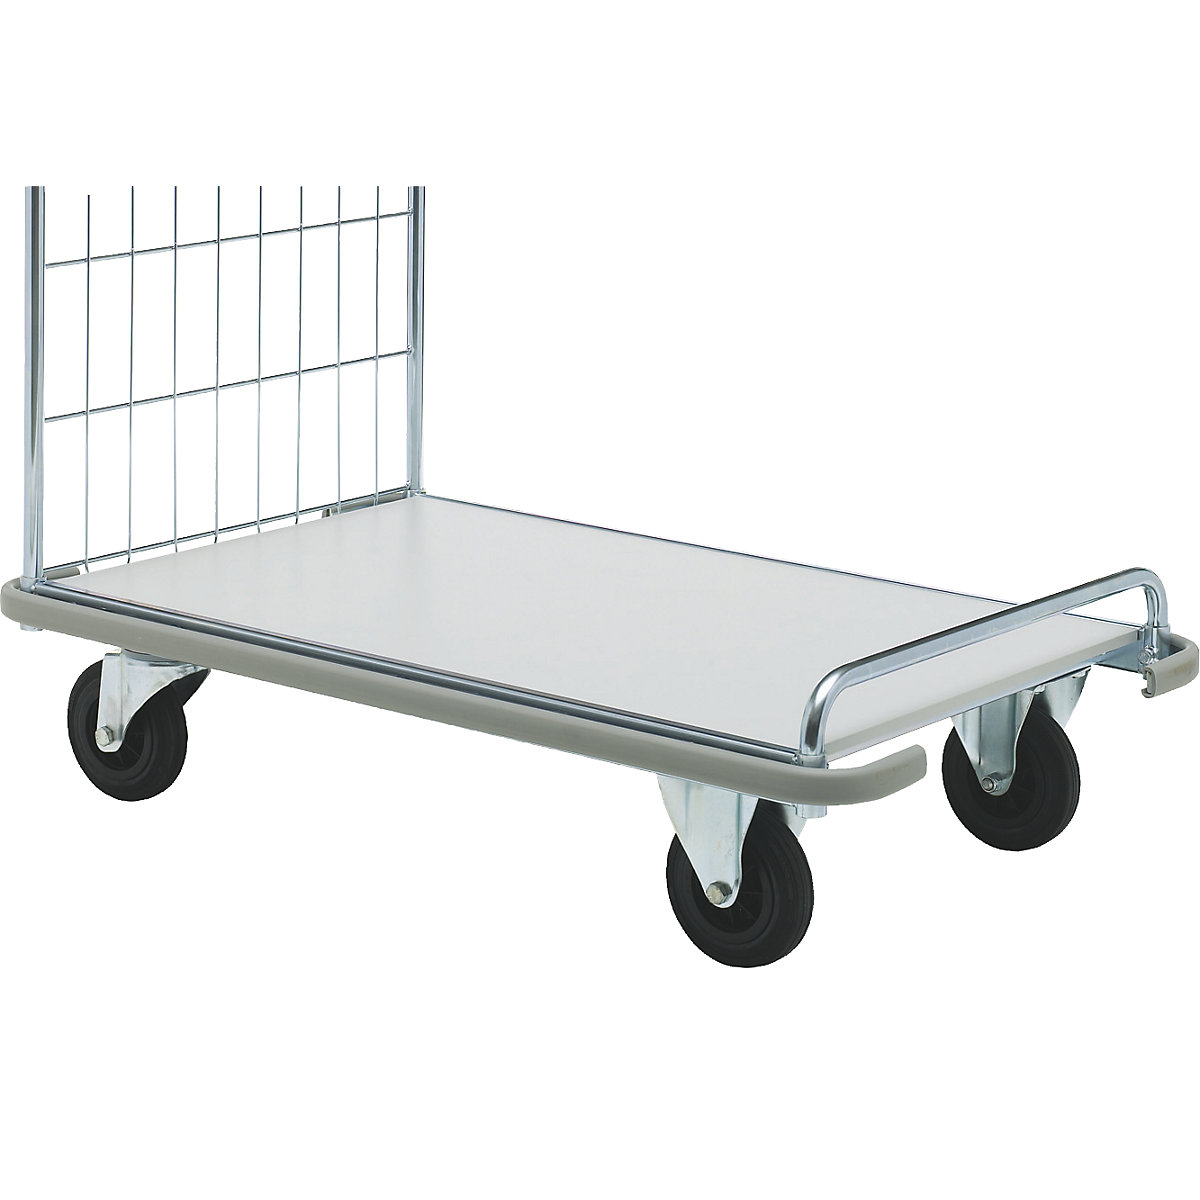 Guard strip for trolleys with panels on 4 sides - HelgeNyberg